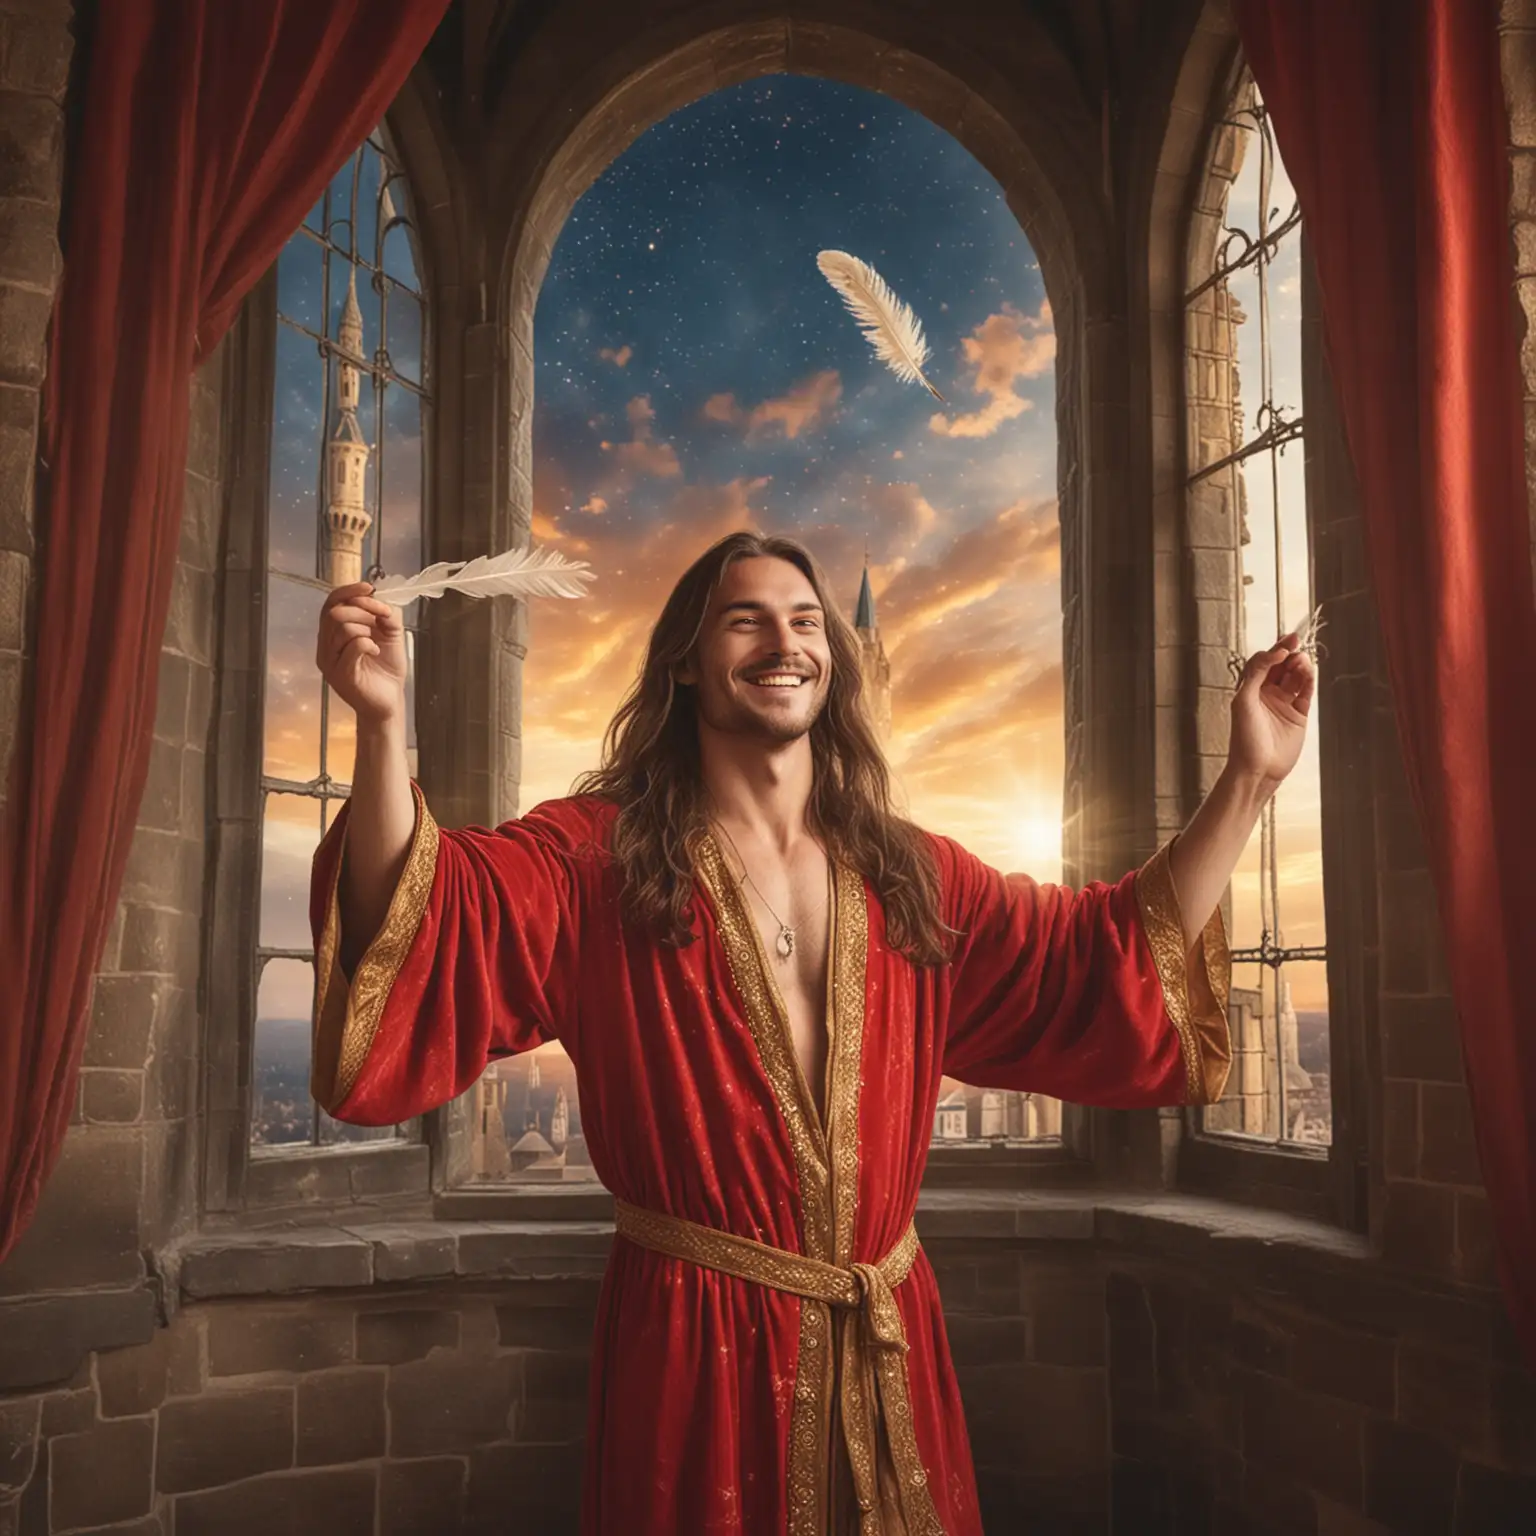 medieval smiling long haired man dressed in a soft crimson robe with gold trim holding a feather and dancing in front of a castle window with celestial skies above